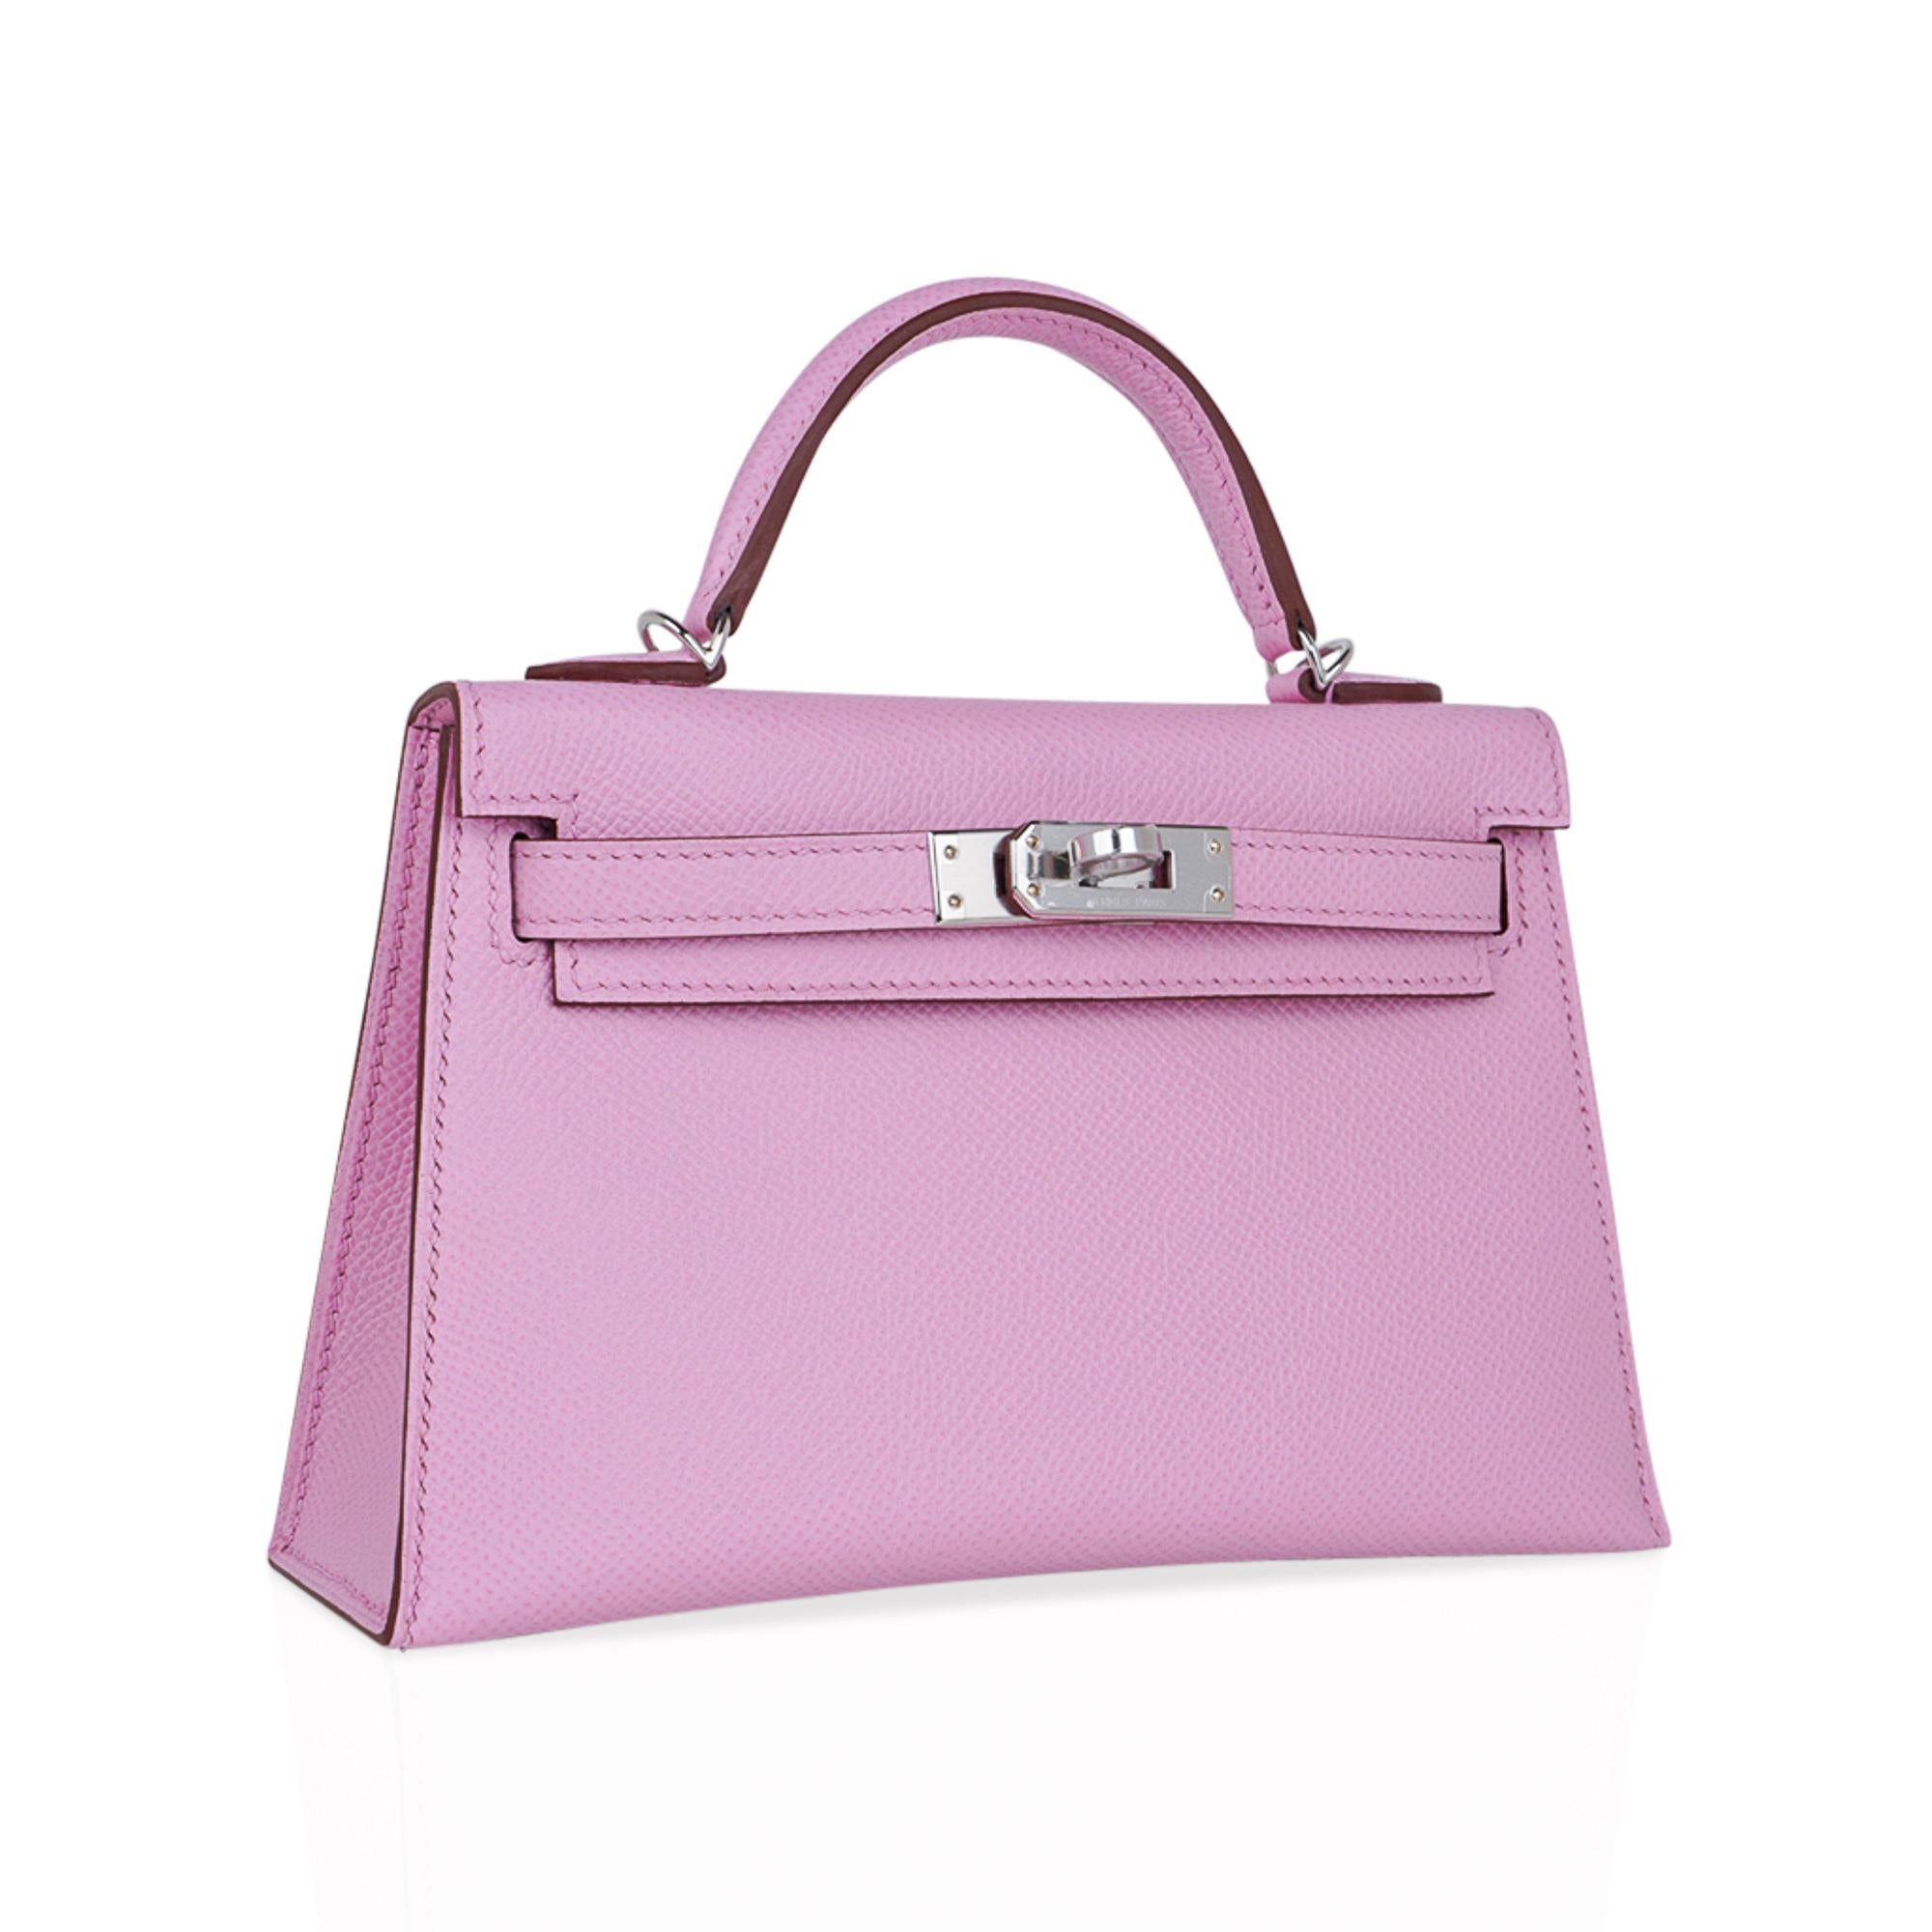 Mightychic offers an Hermes Kelly 20 Mini Sellier bag in gorgeous soft Mauve Sylvestre. 
Epsom leather with Palladium hardware.
Carry by hand, shoulder or cross body.
Divine size for day to evening.
Comes with shoulder strap, signature Hermes orange